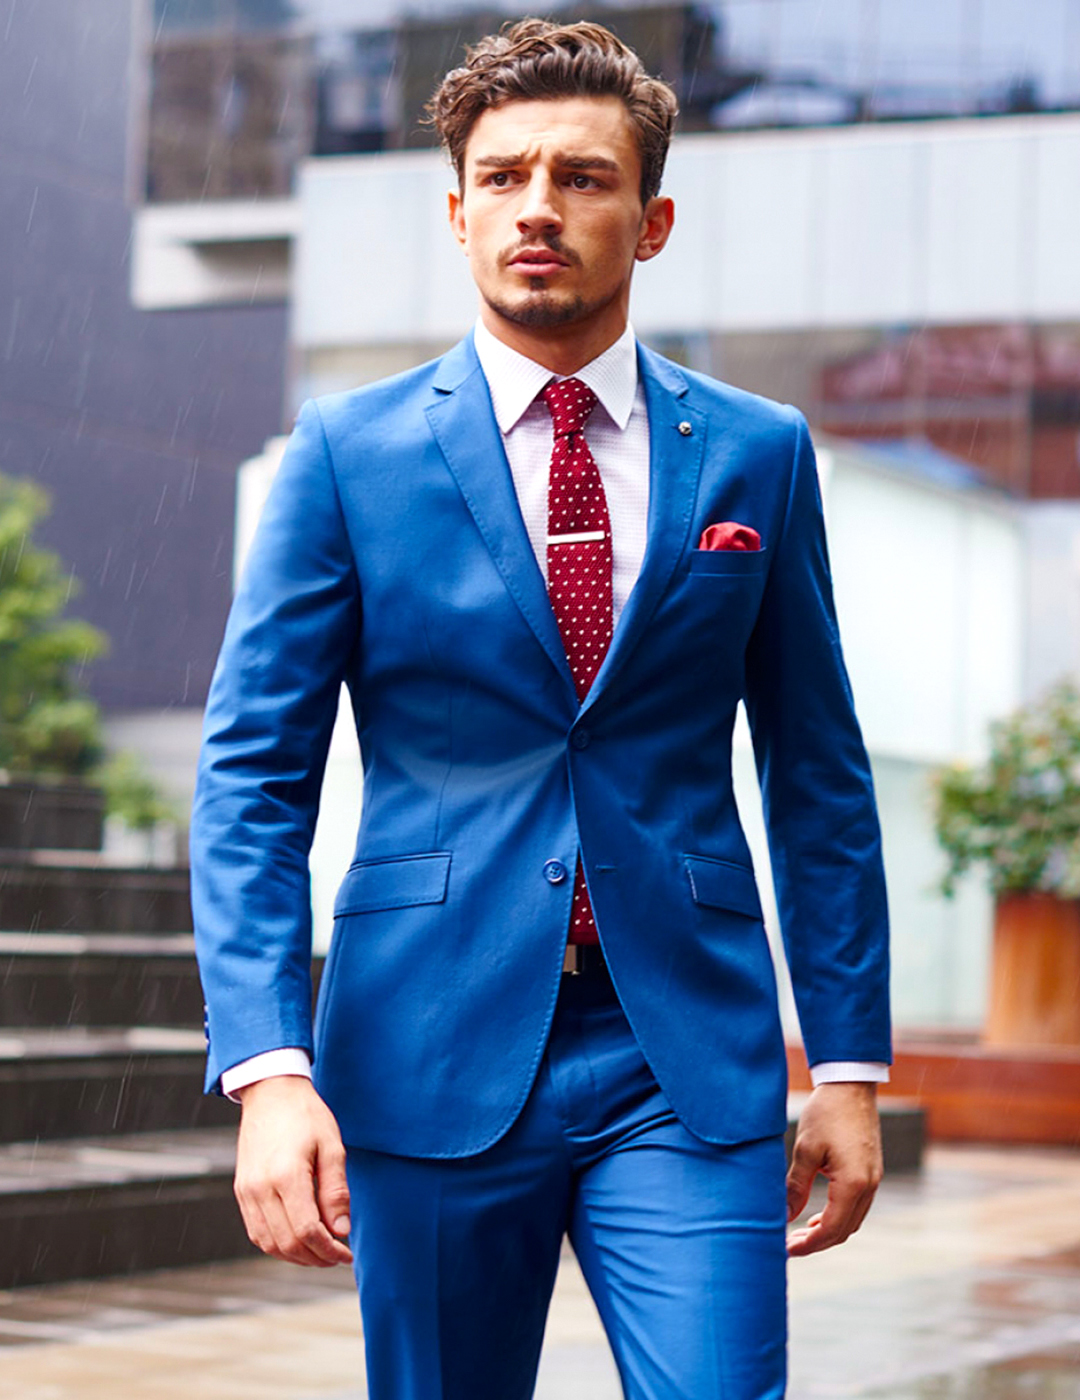 Blue suit, white shirt, and red foulard tie